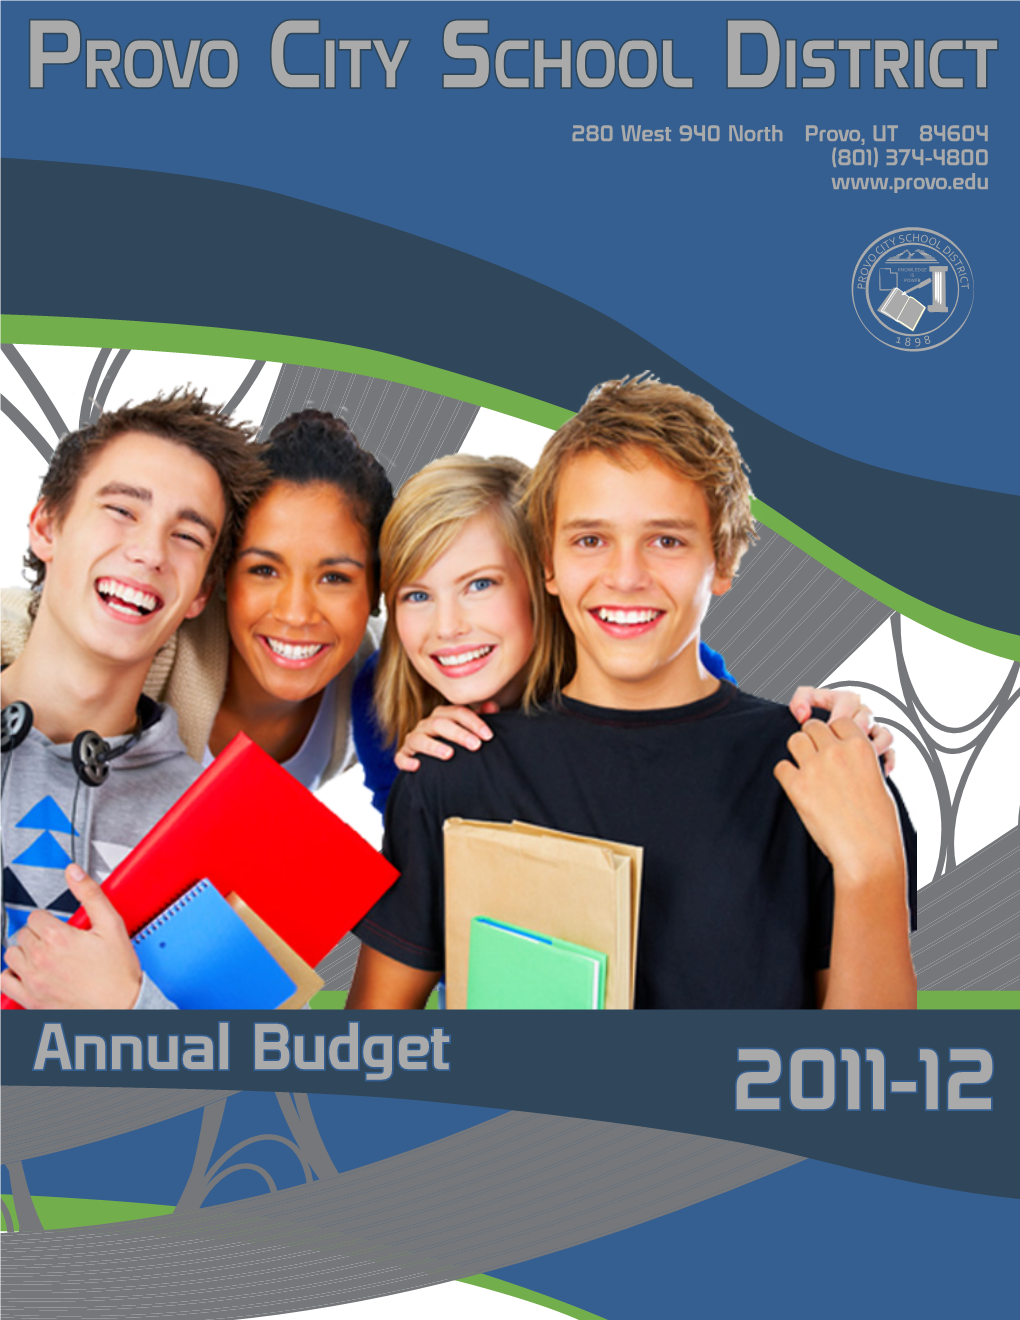 2011-2012 Annual Budget